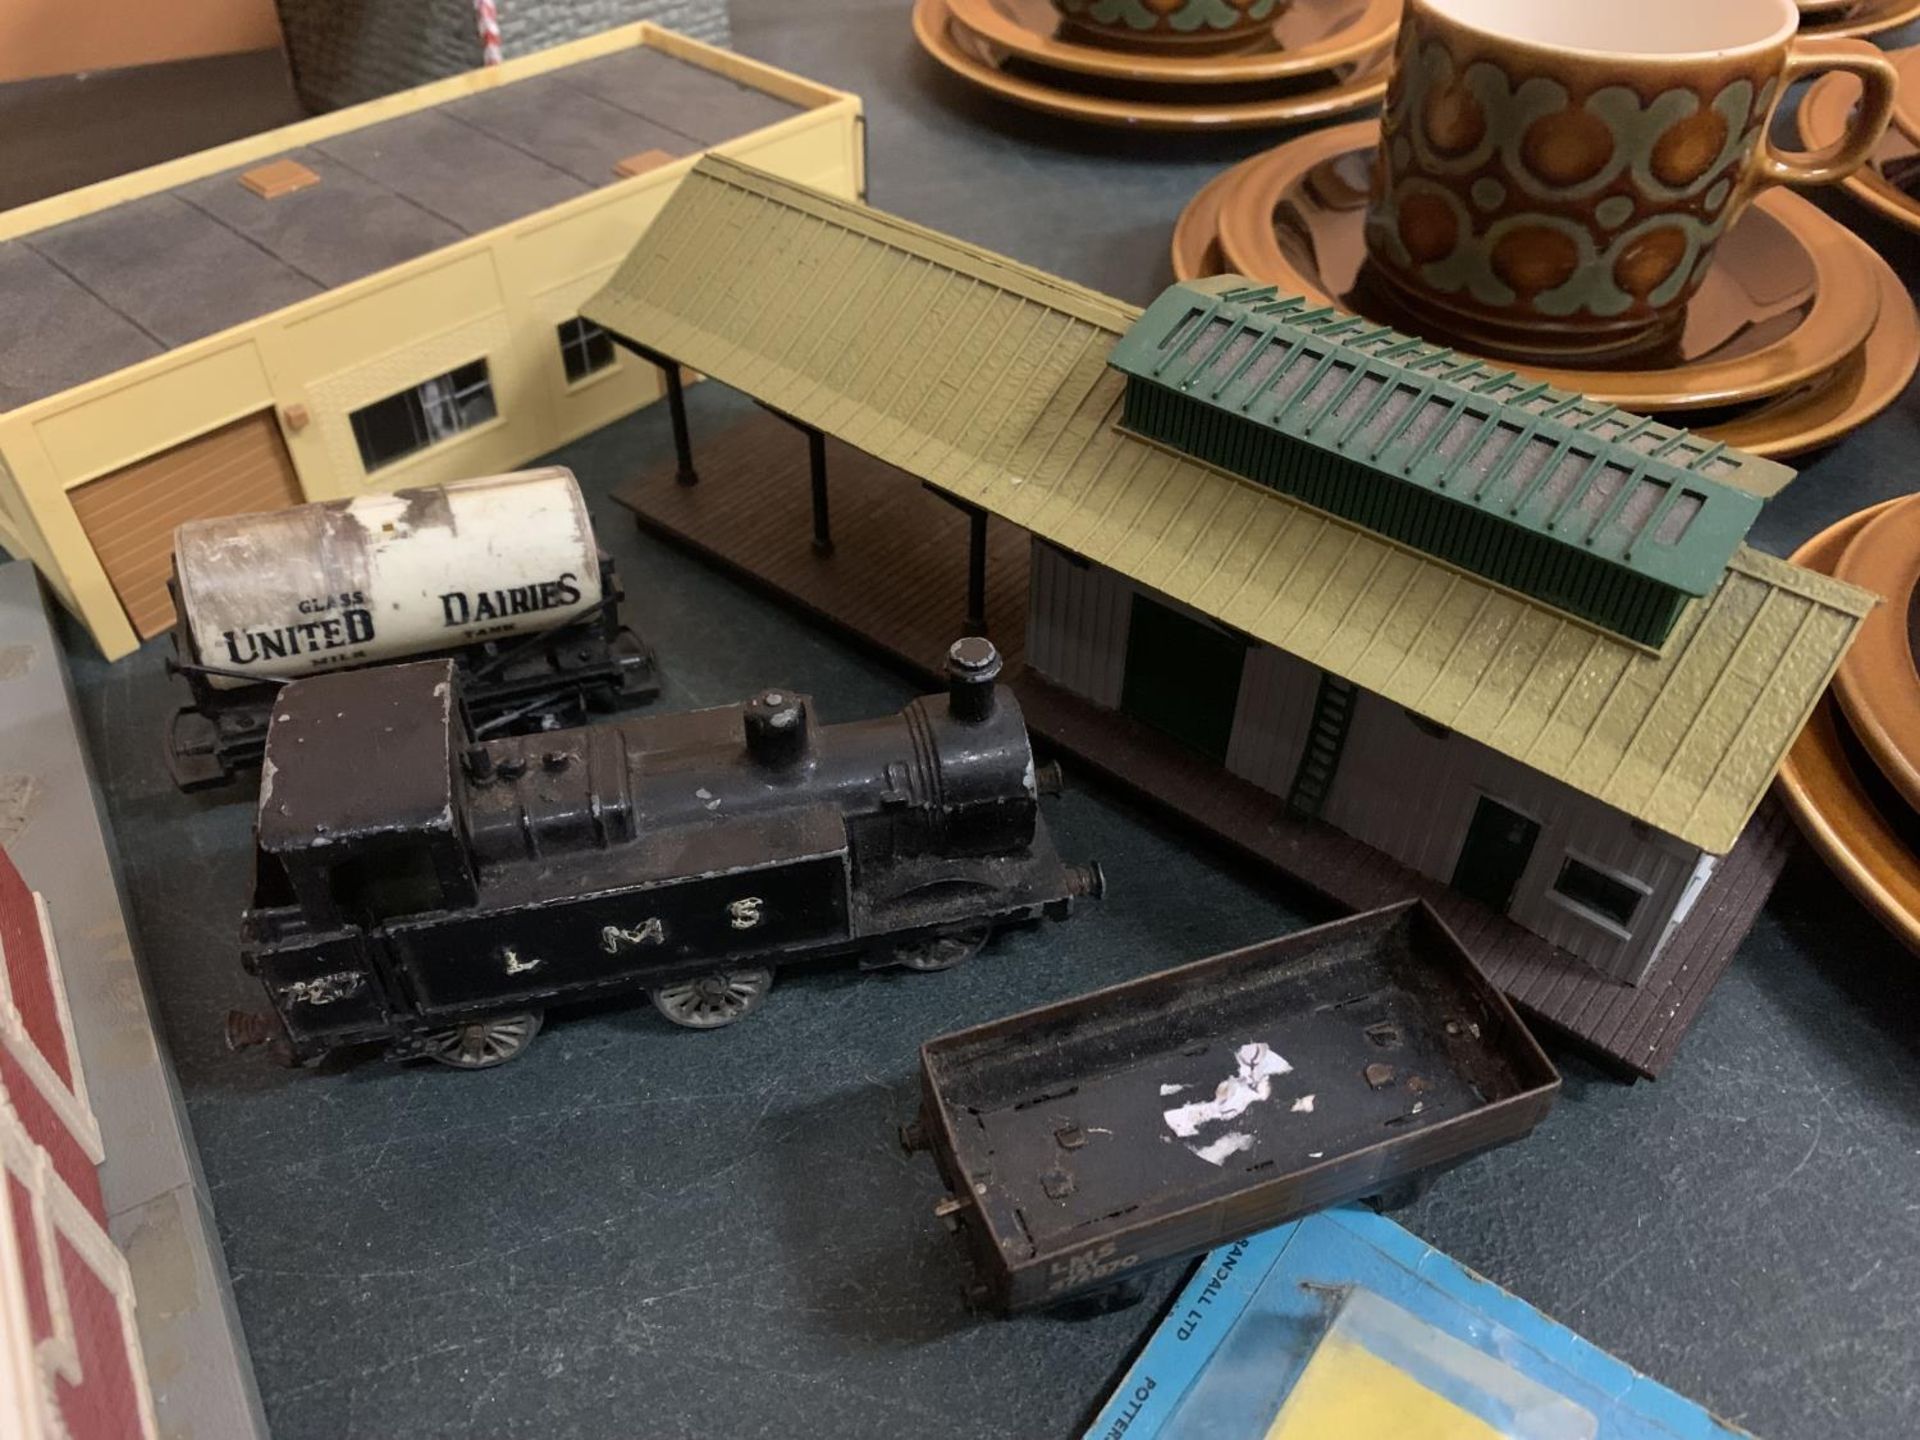 A NUMBER OF MODEL TRAIN ITEMS TO INCLUDE TRAIN STATION PLATFROMS, A BRIDGE AND PASSENGERS - Image 3 of 5